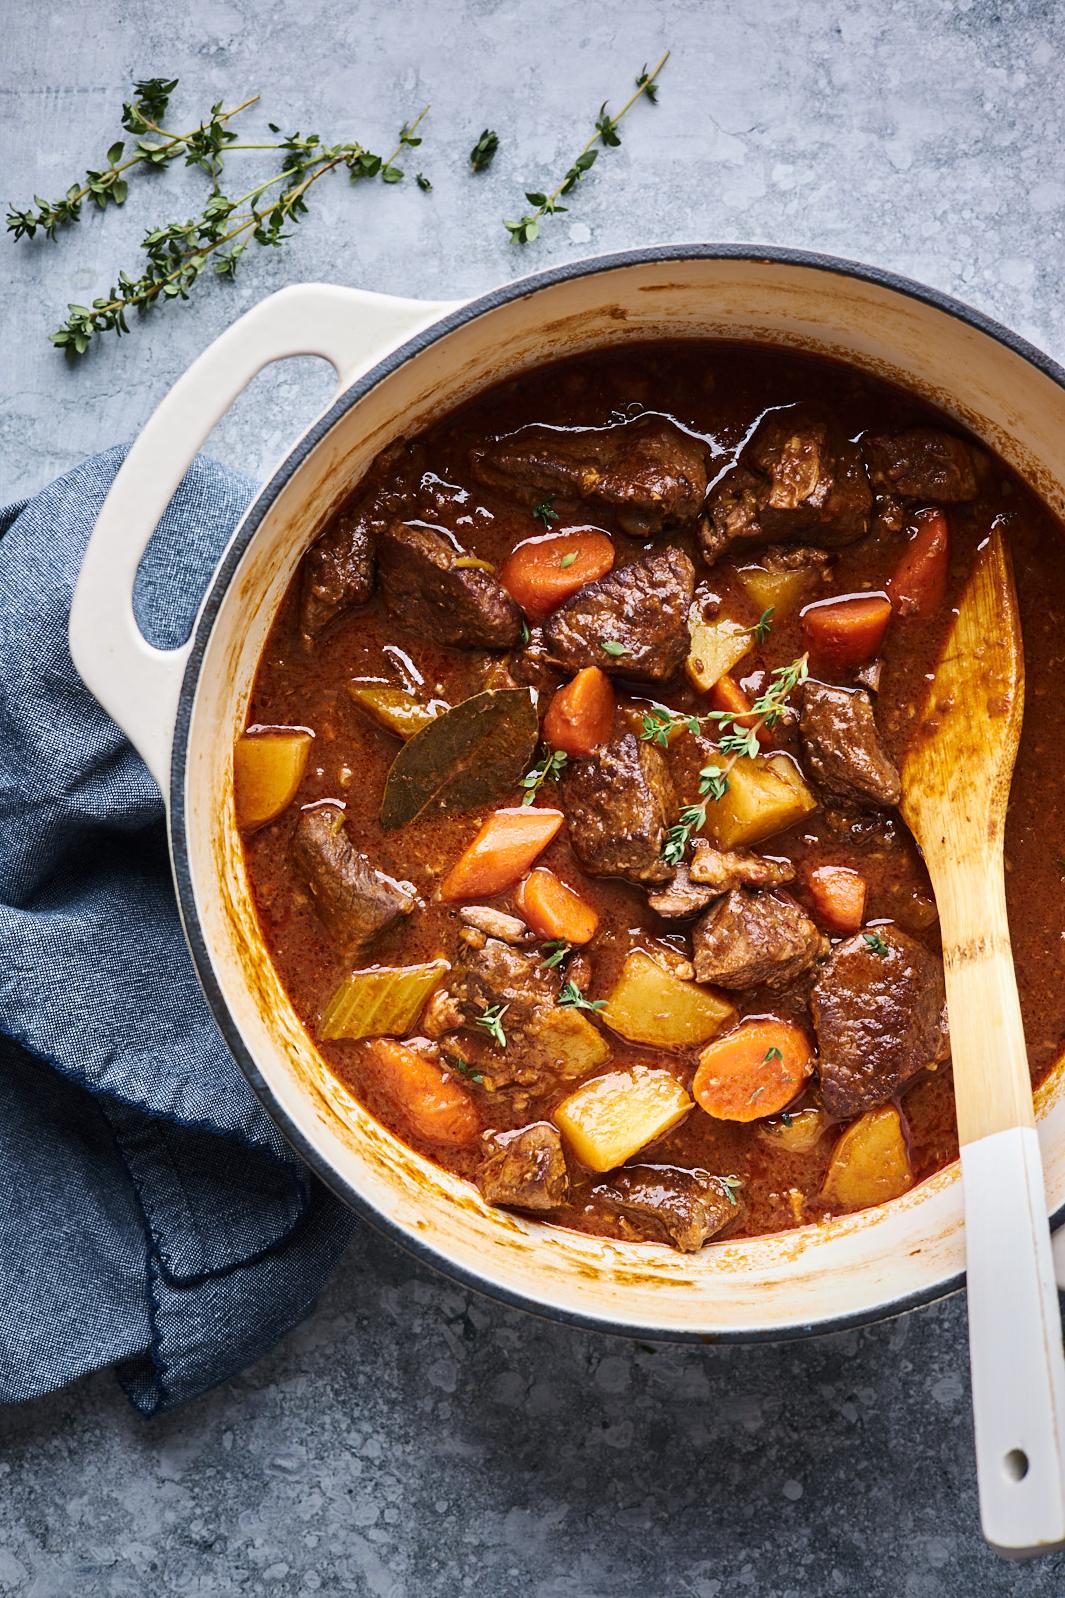  The tender beef chunks in this stew will melt in your mouth